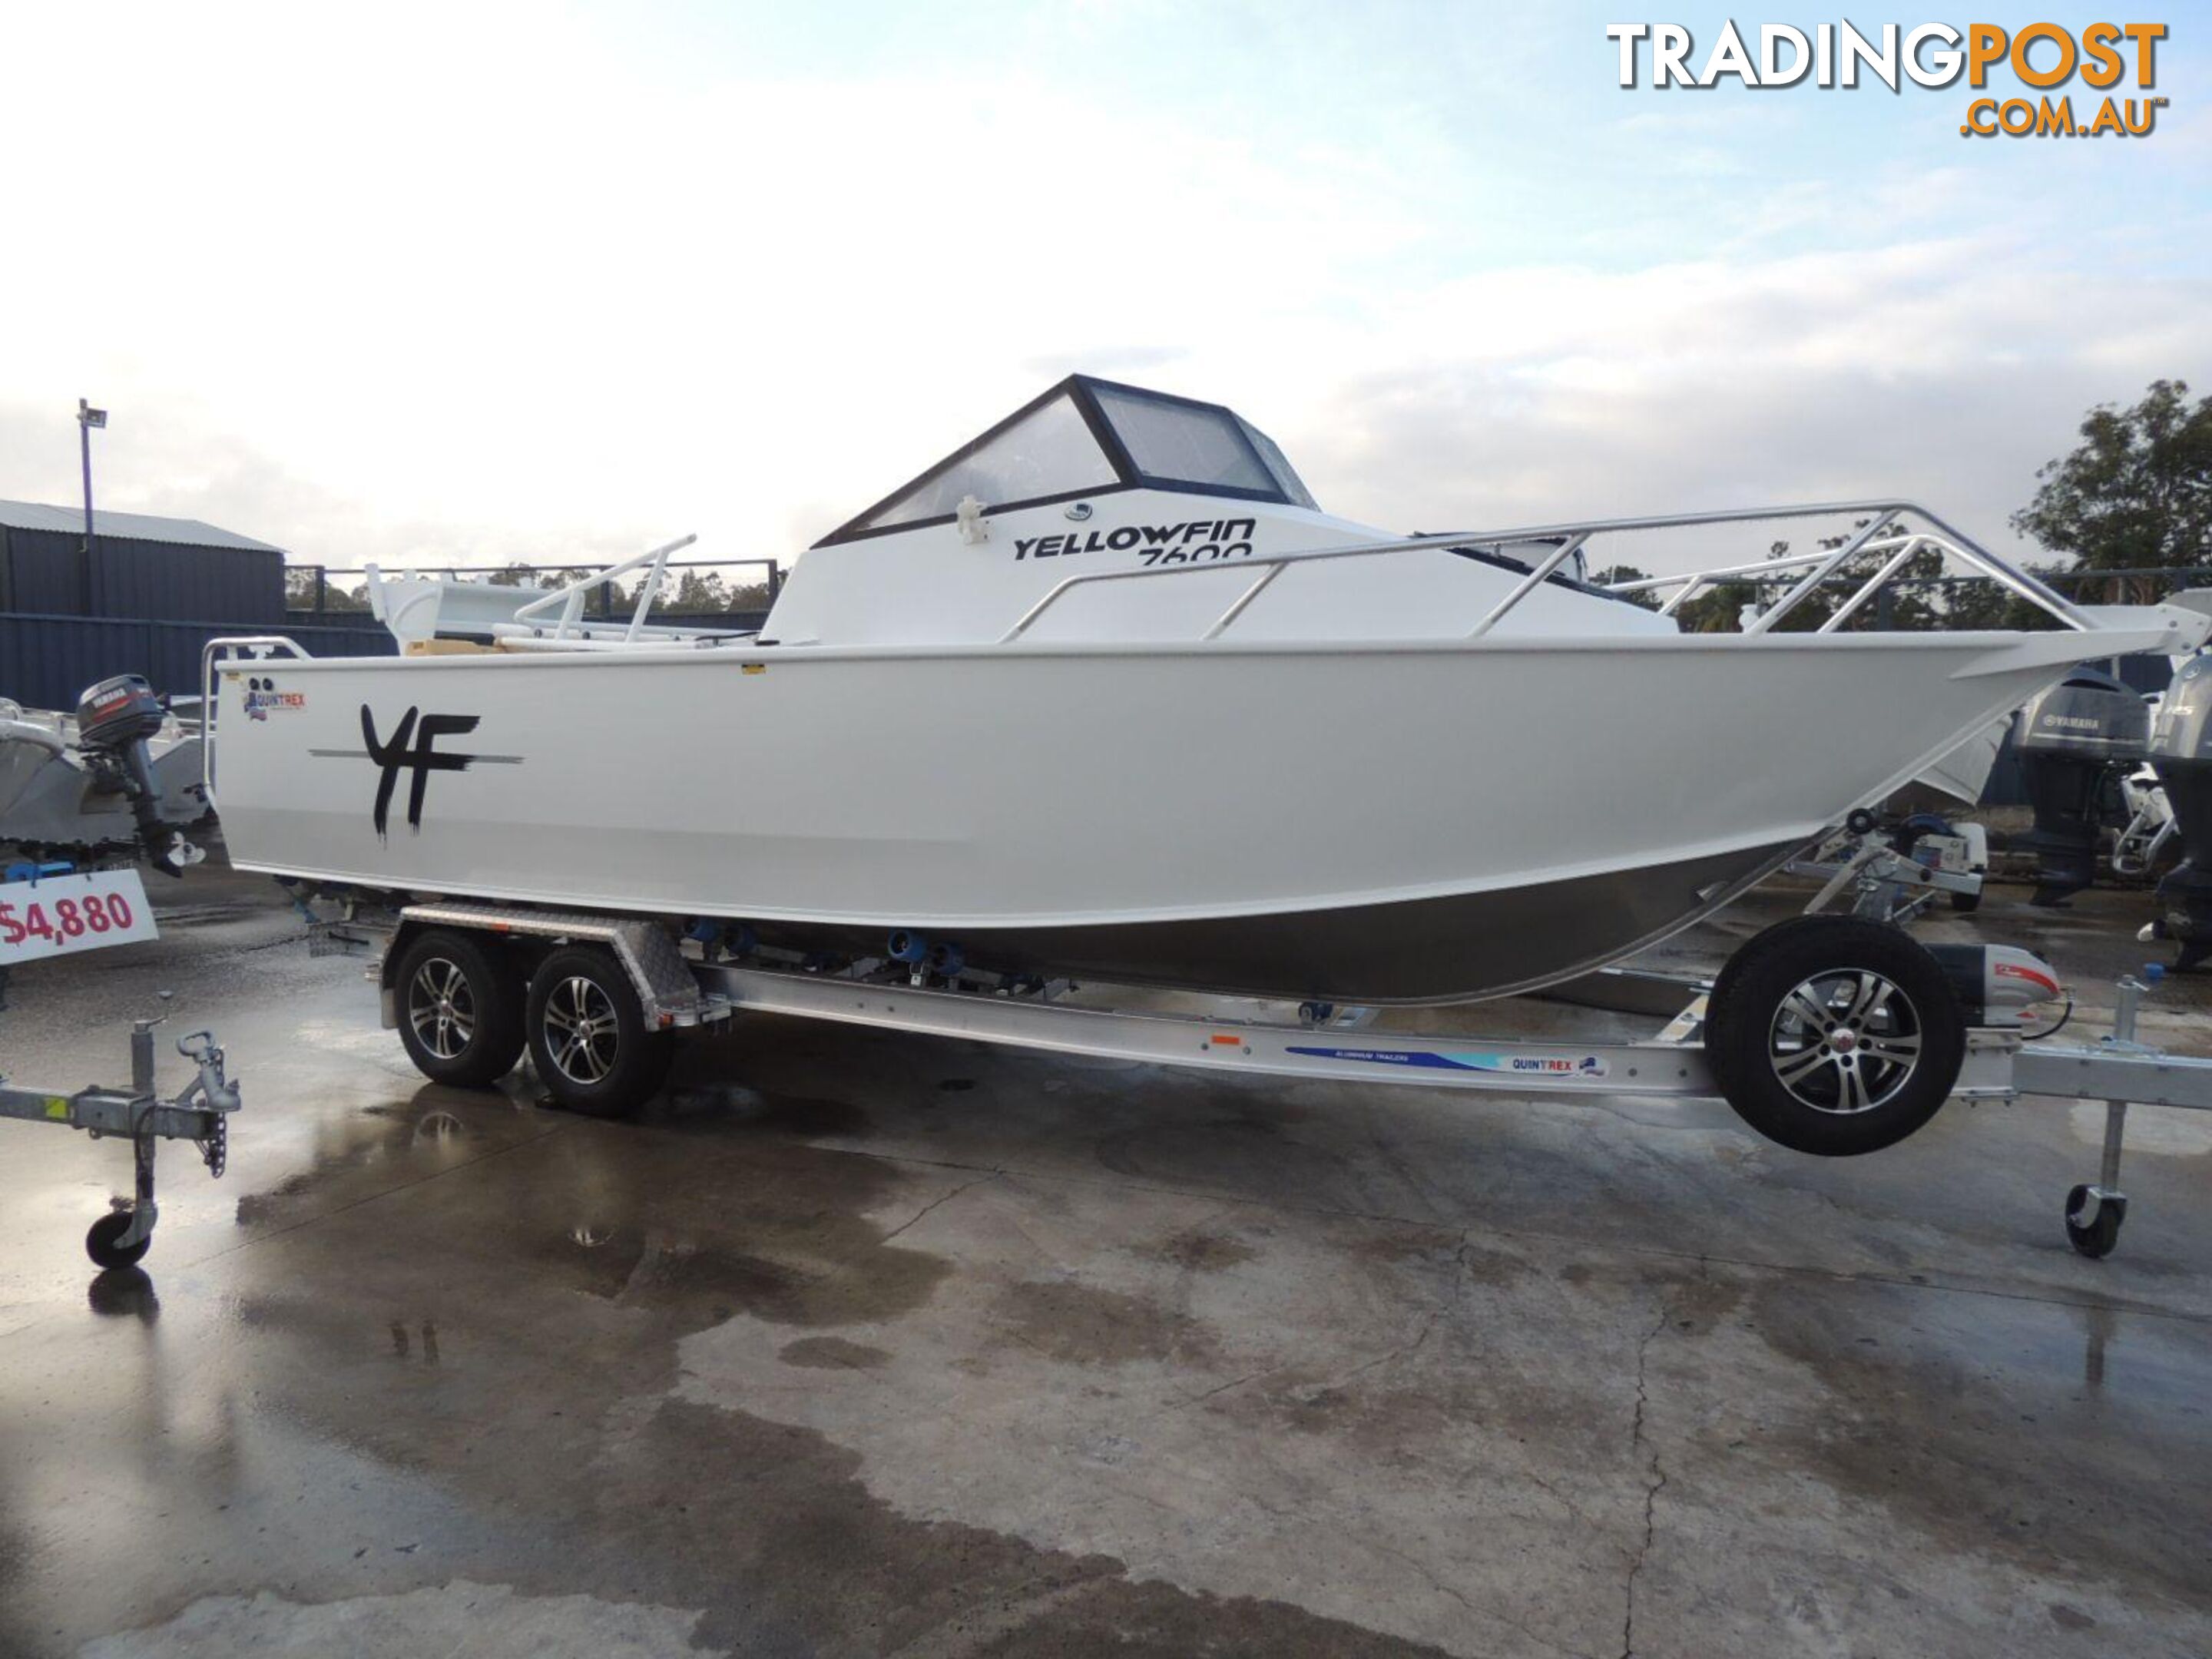 Yellowfin 7600 Soft Top Cabin + Yamaha F225hp 4-Stroke - Pack 1 for sale online prices